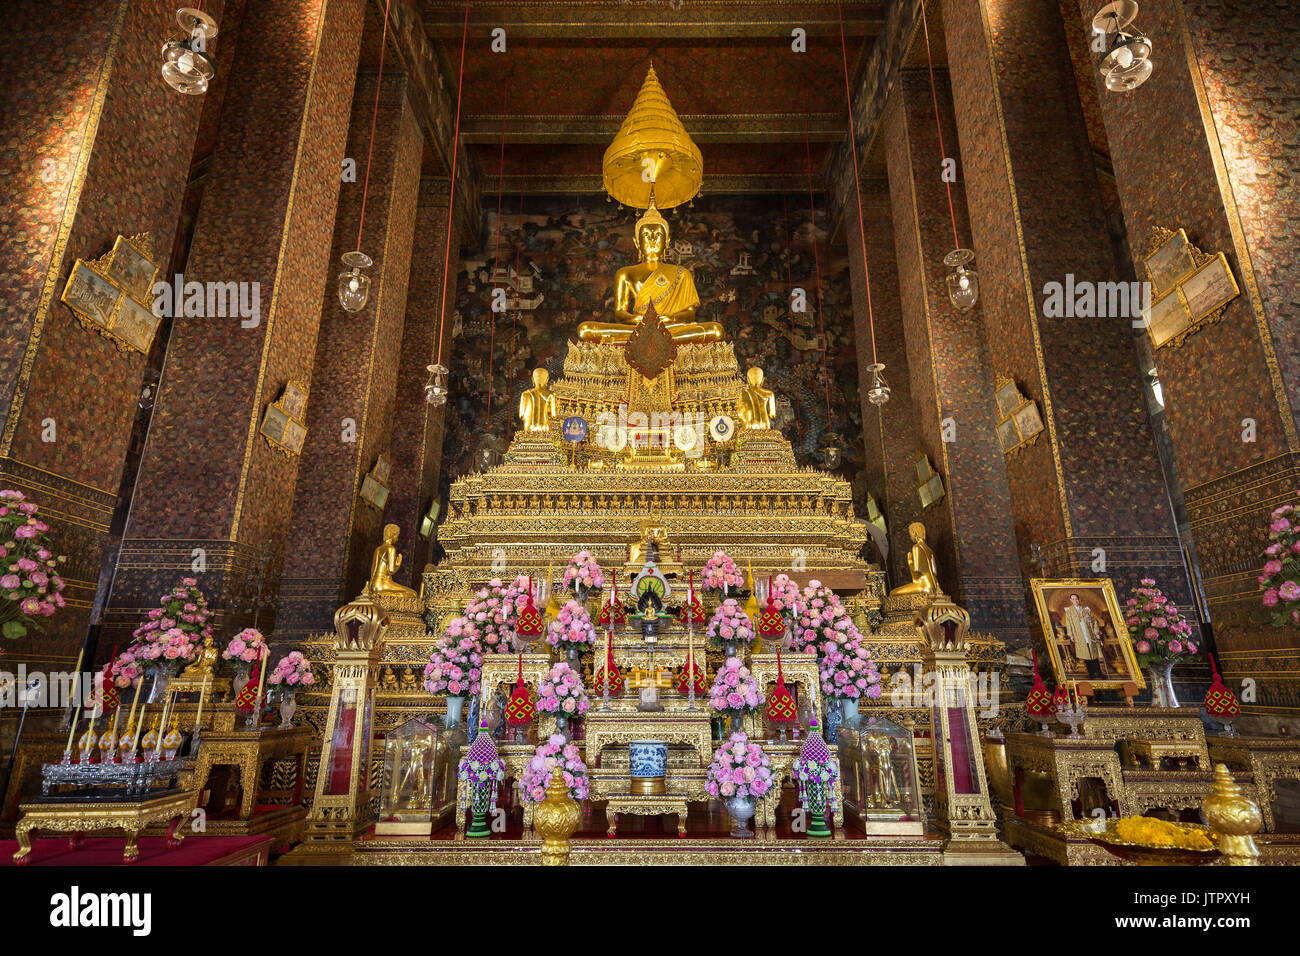 Ornate and golden altar inside the decorated Phra Ubosot or Ordination Hall (the holiest prayer room) at the Wat Pho (Po) temple complex in Bangkok. Stock Photo